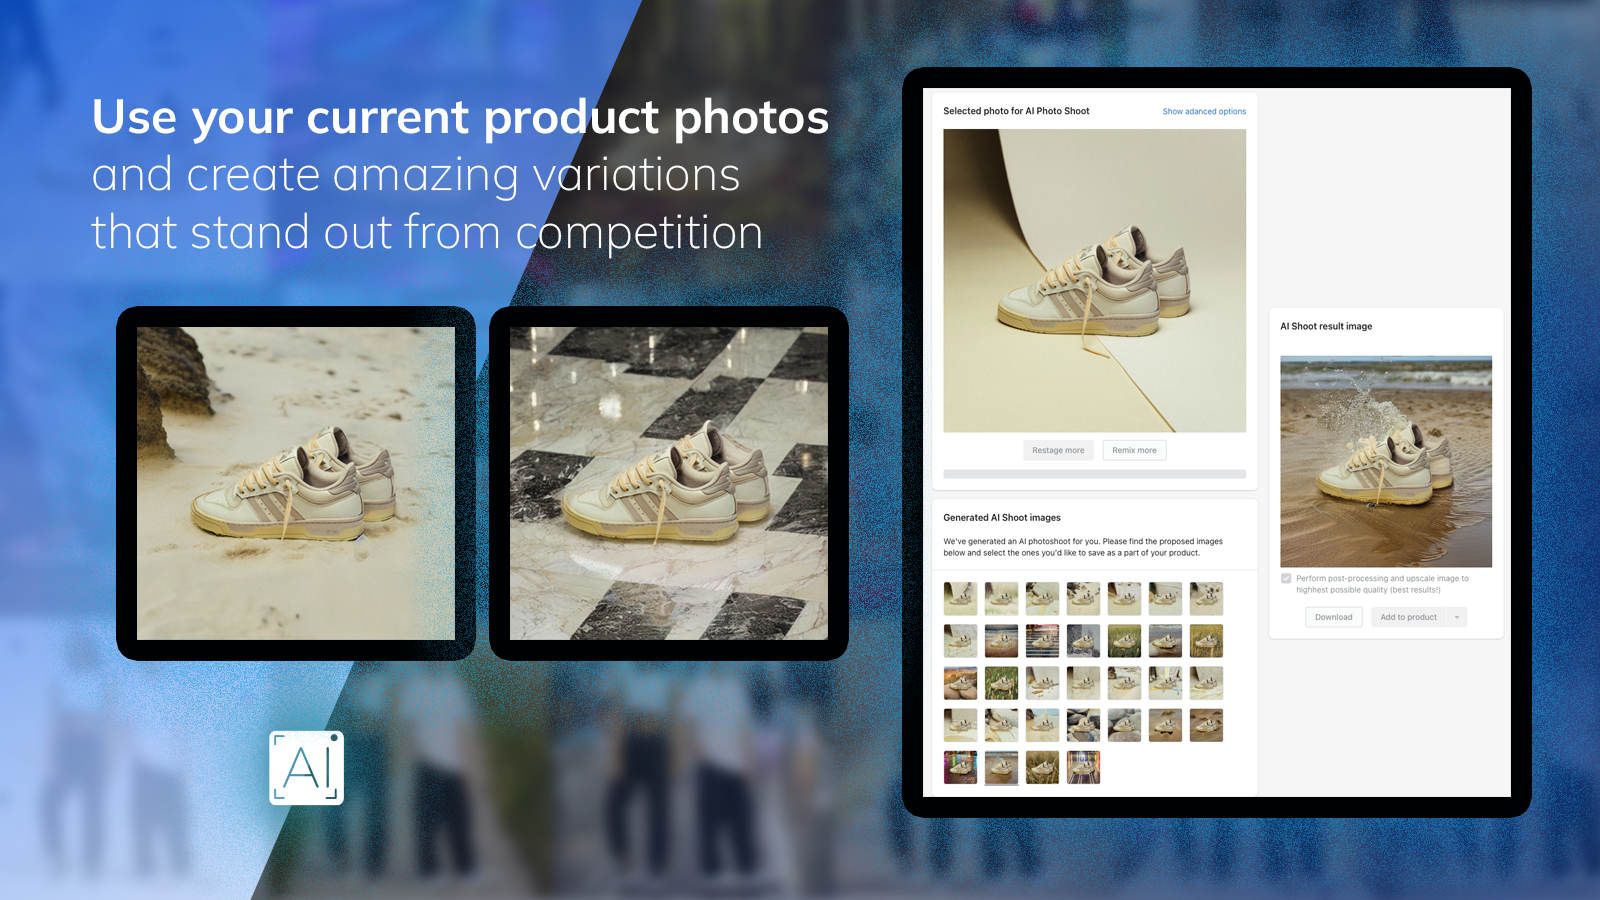 Use your current product photos and create stunning variations